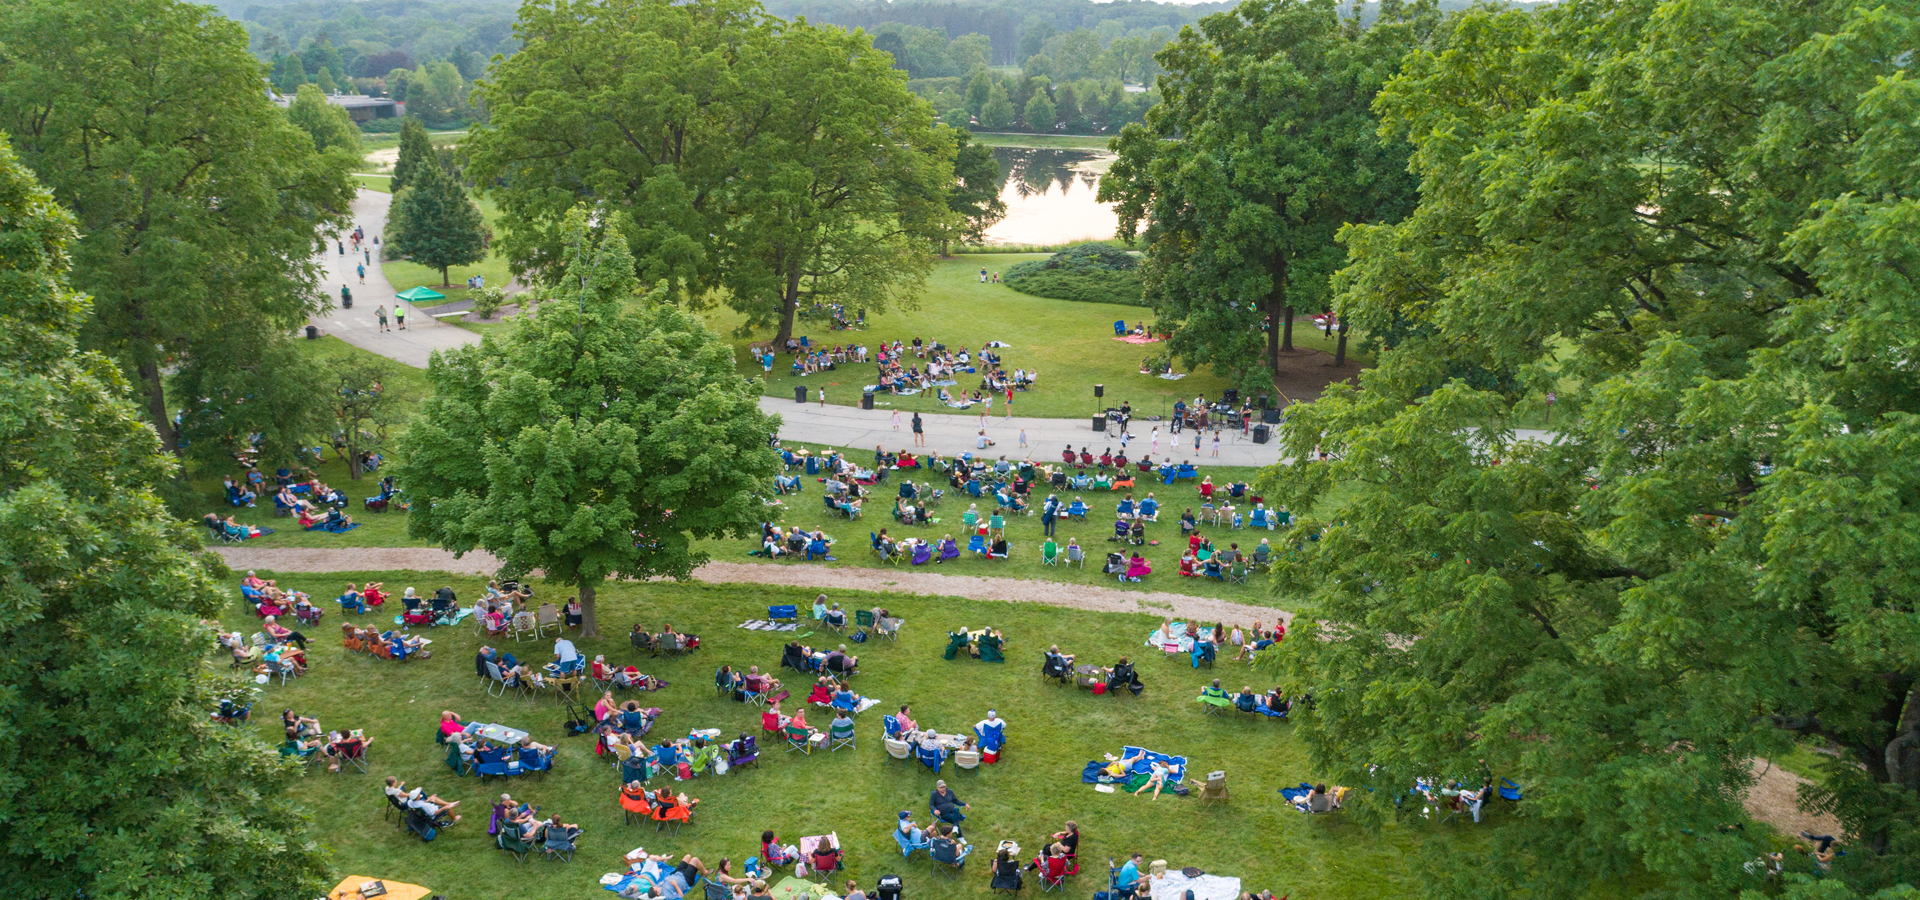 Arbor Evenings aerial photo showing large groups of people